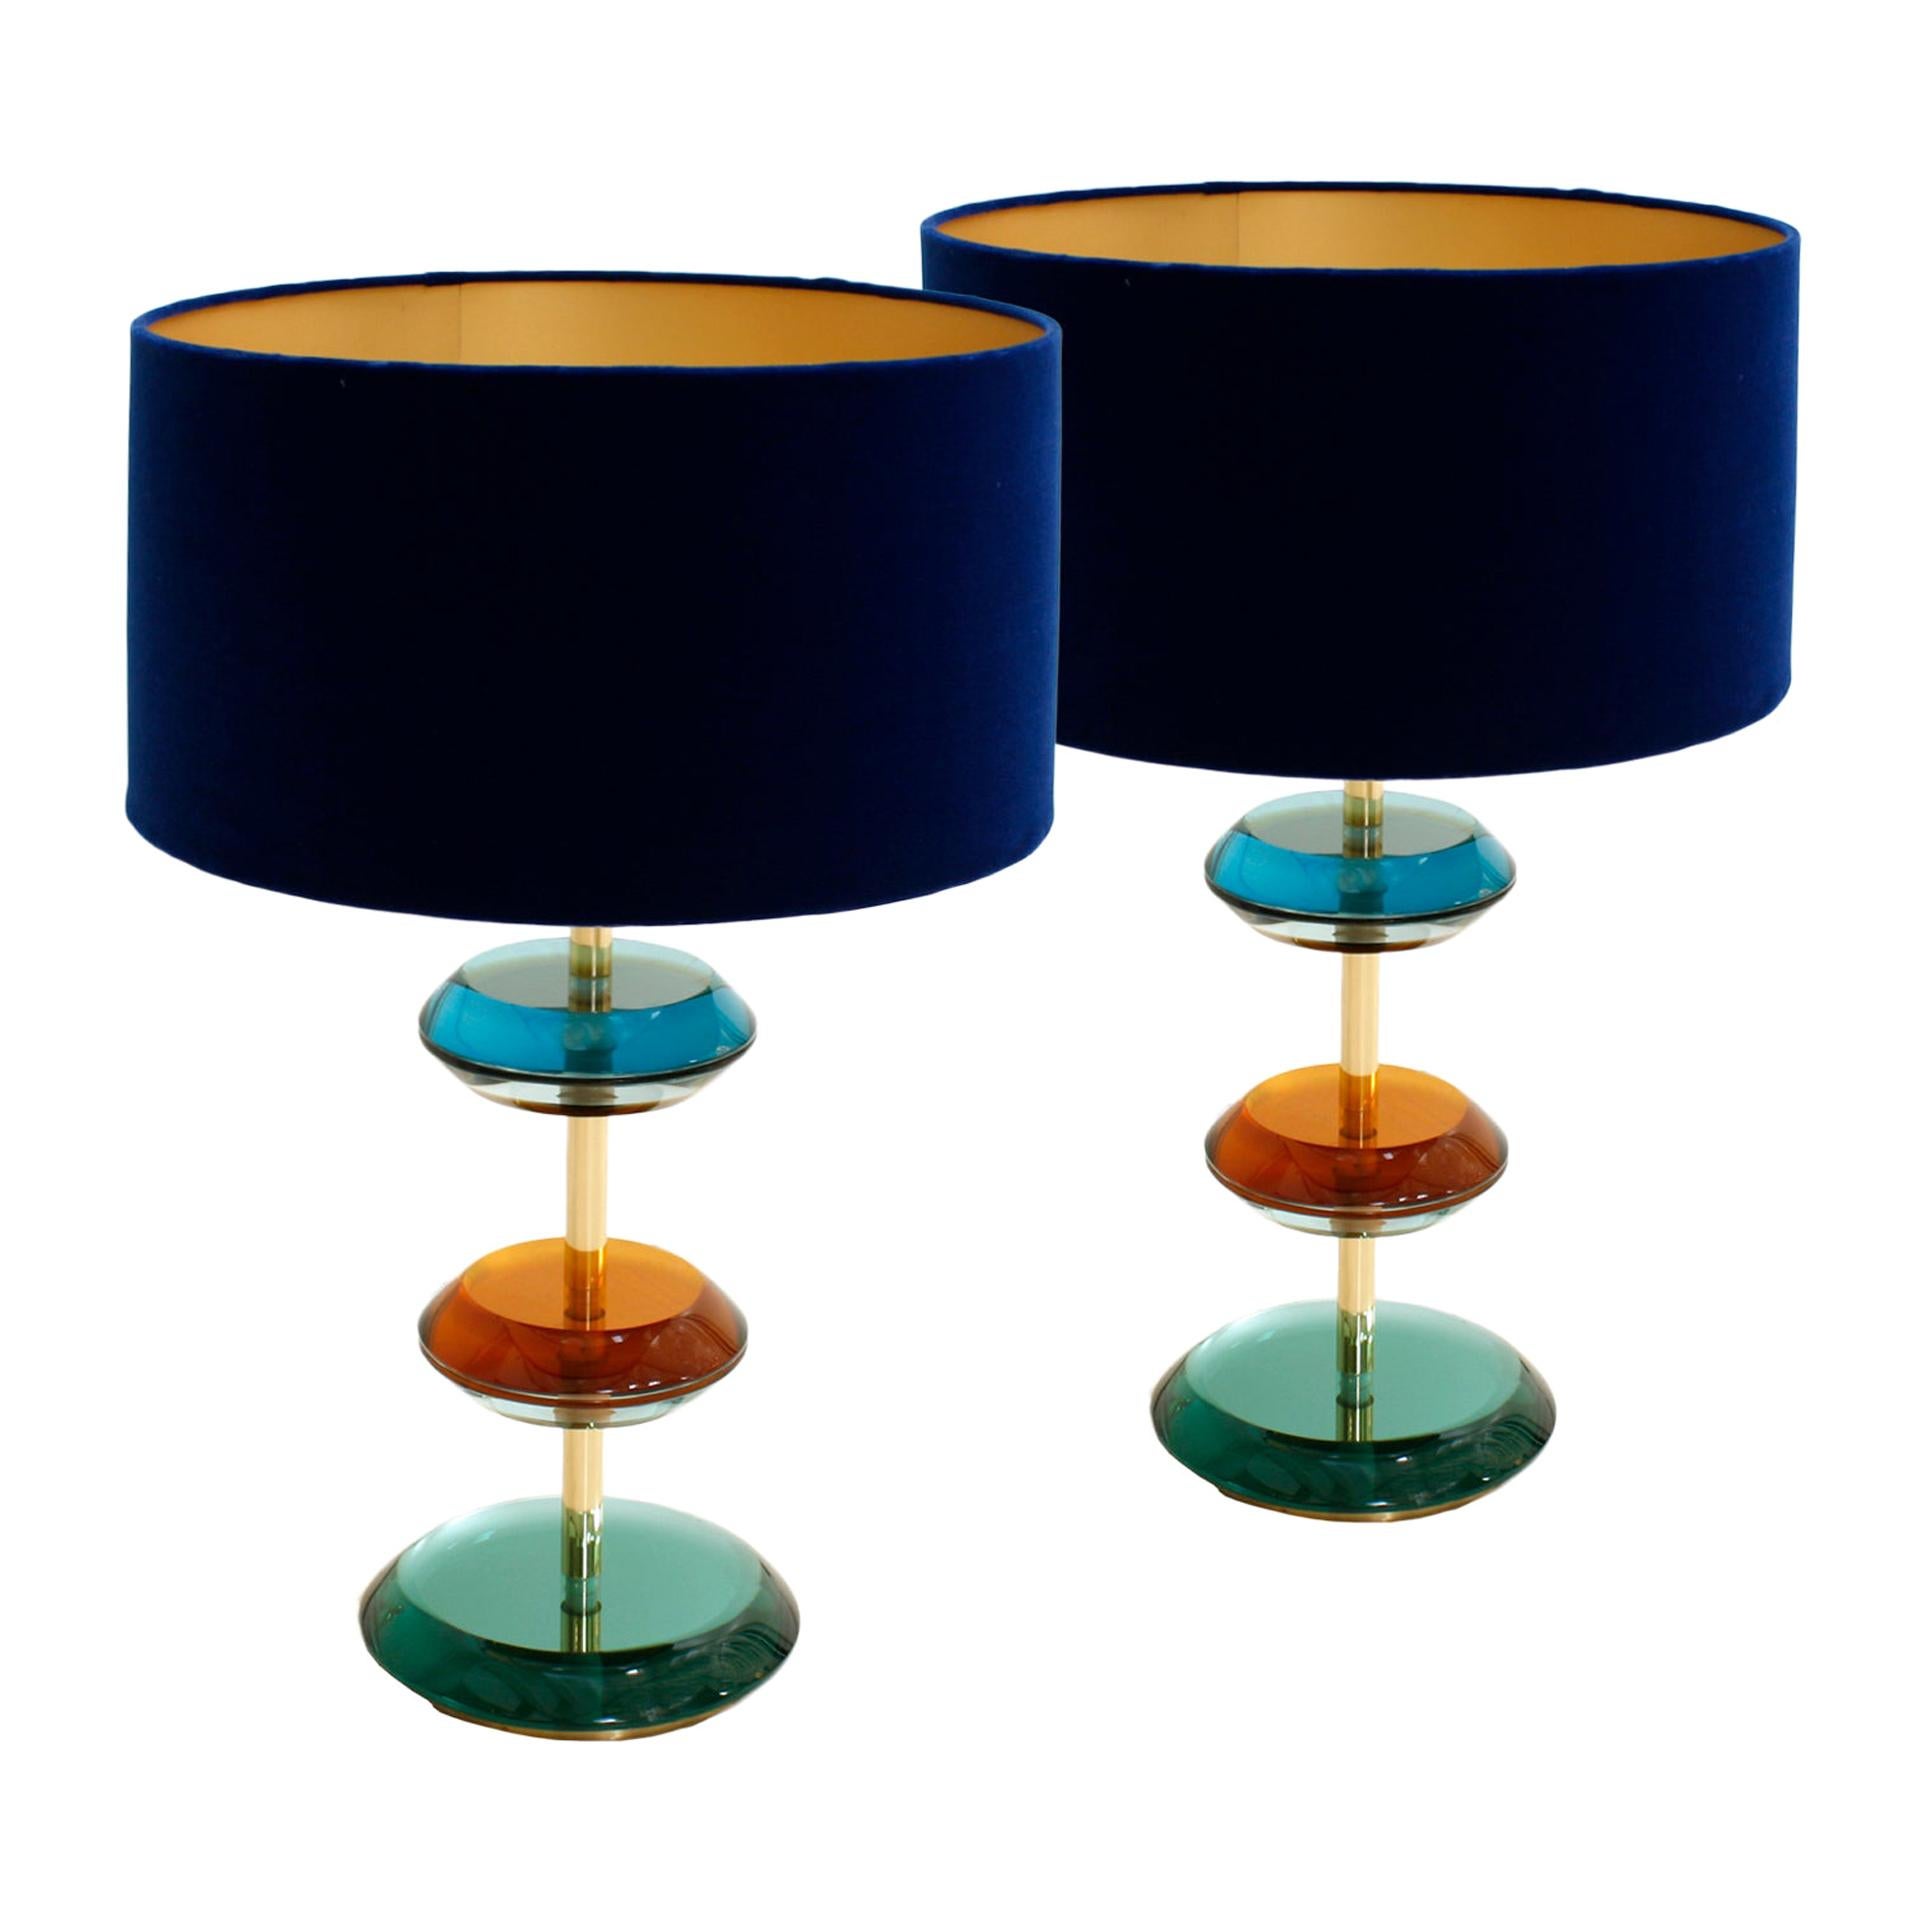 Mid-Century Modern Style Murano Glass and Brass Pair of Italian Table Lamps